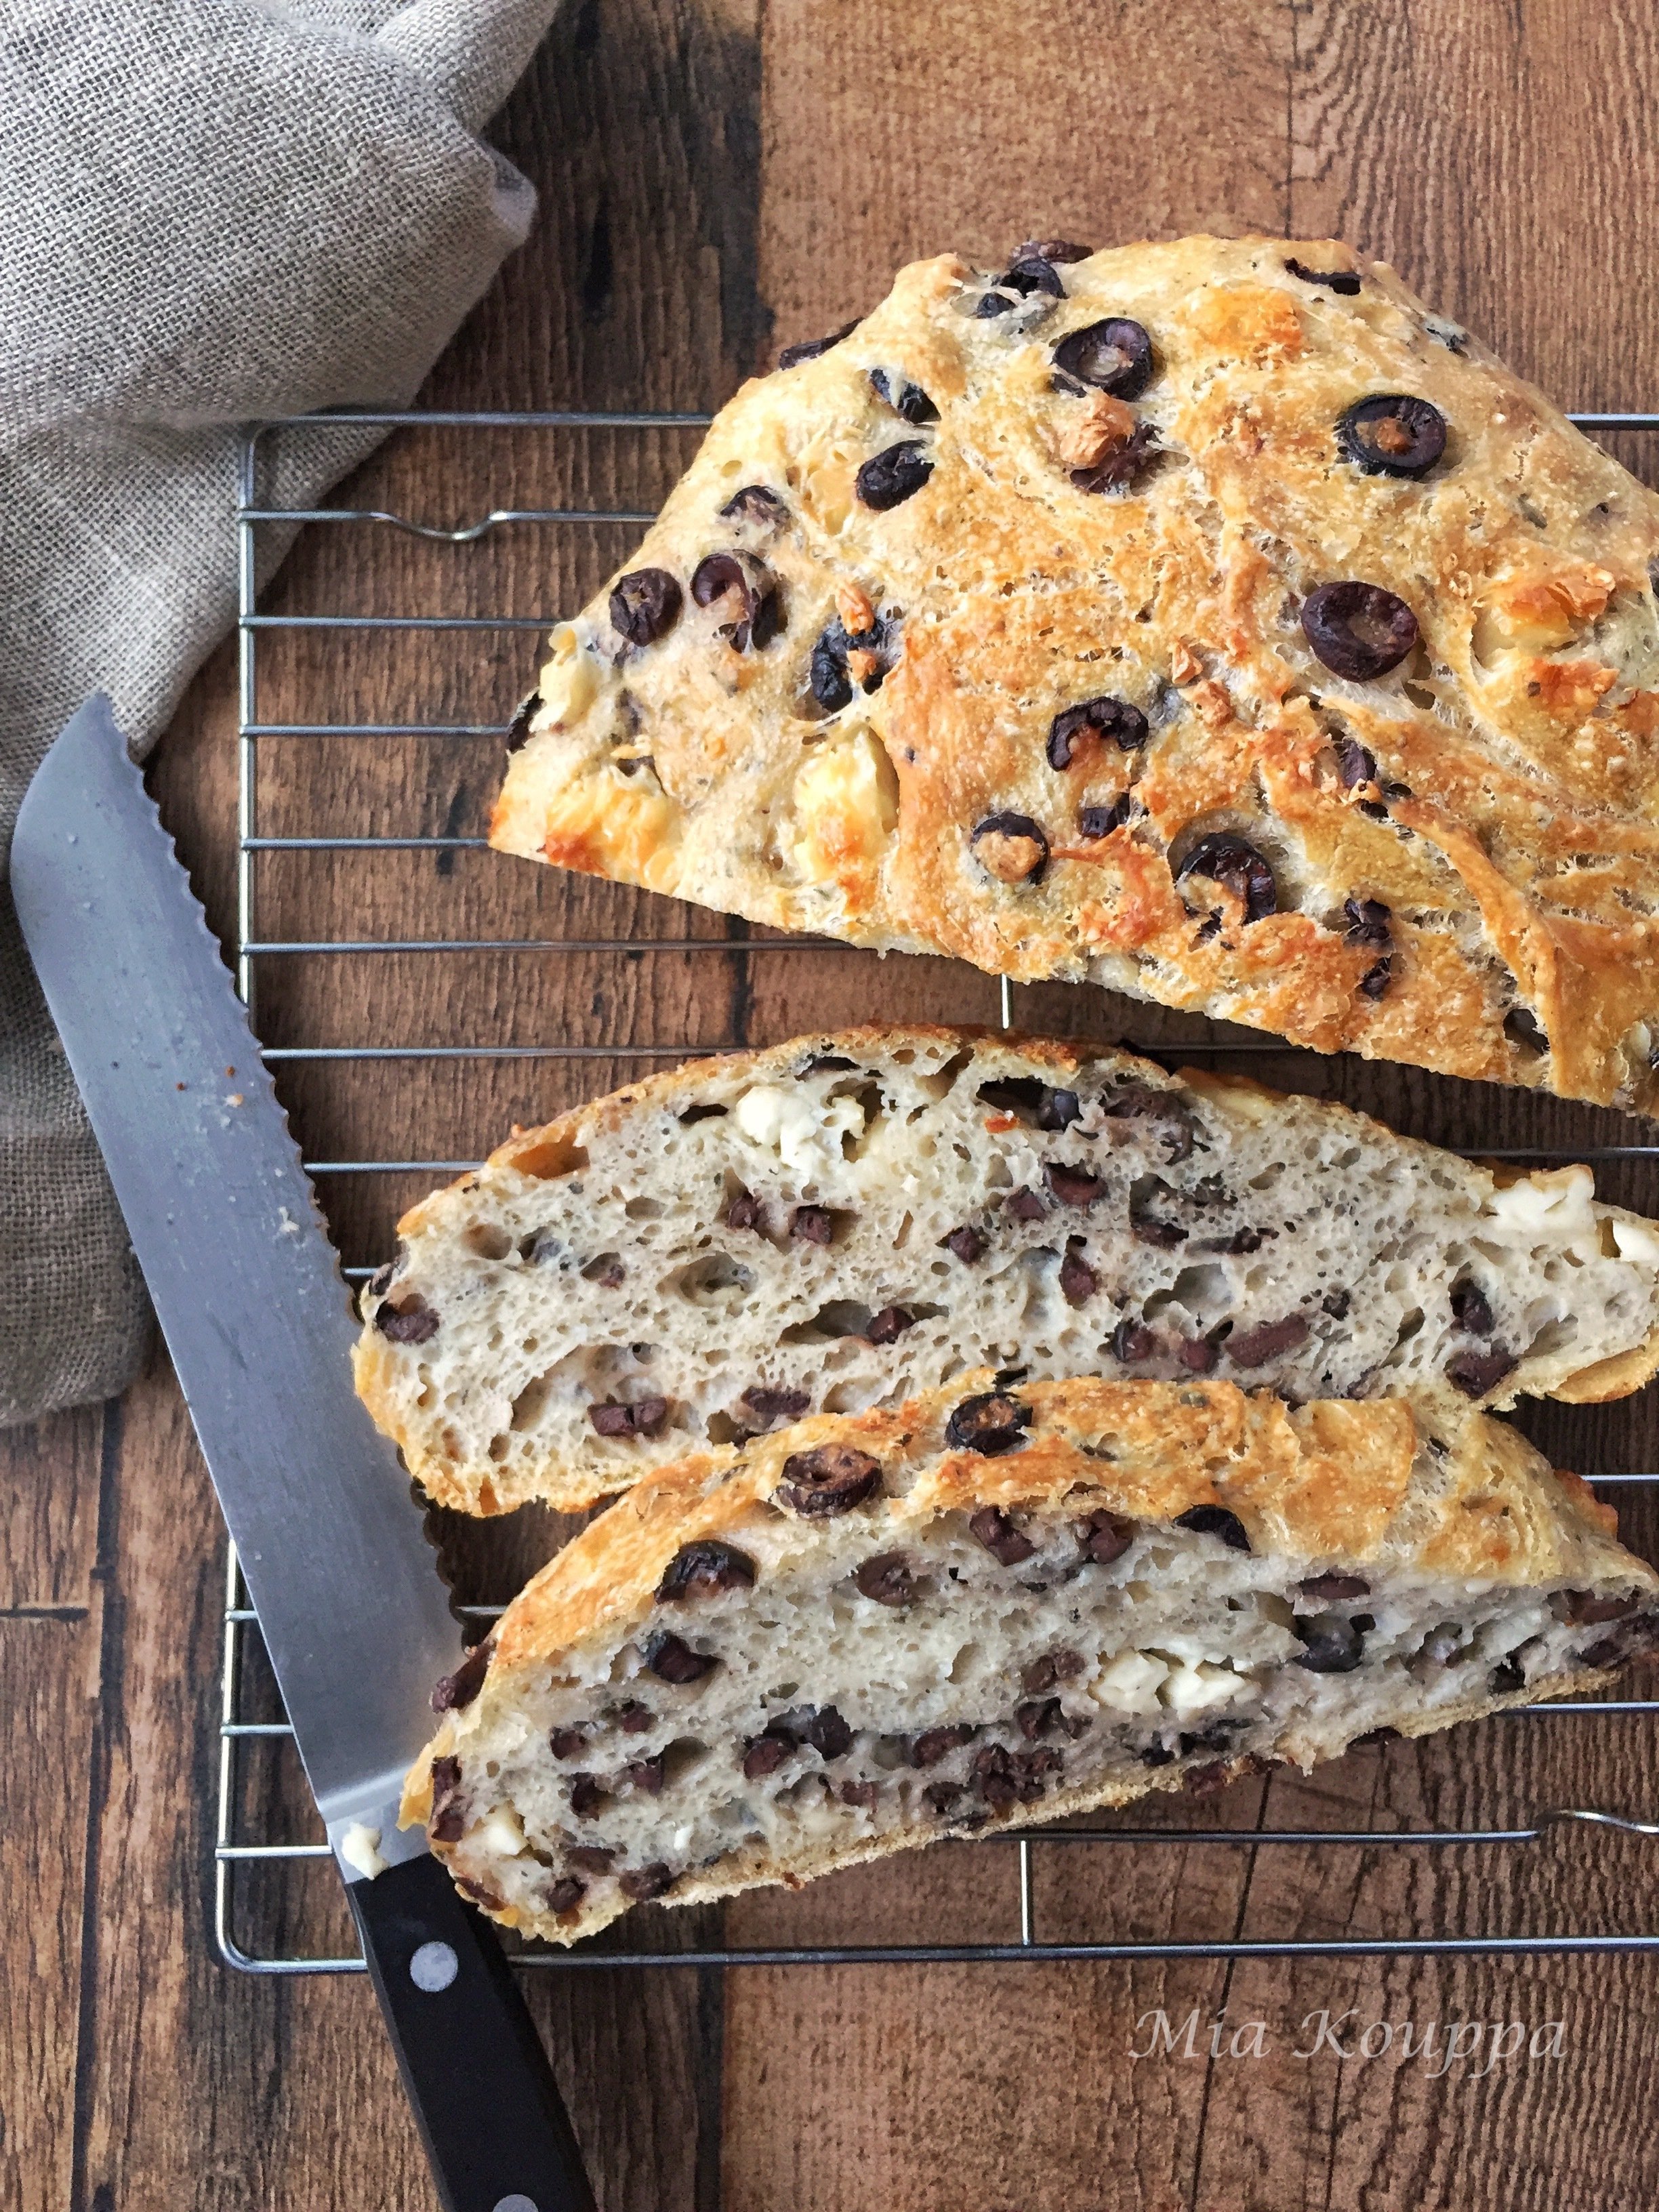 No-knead bread with olives and feta